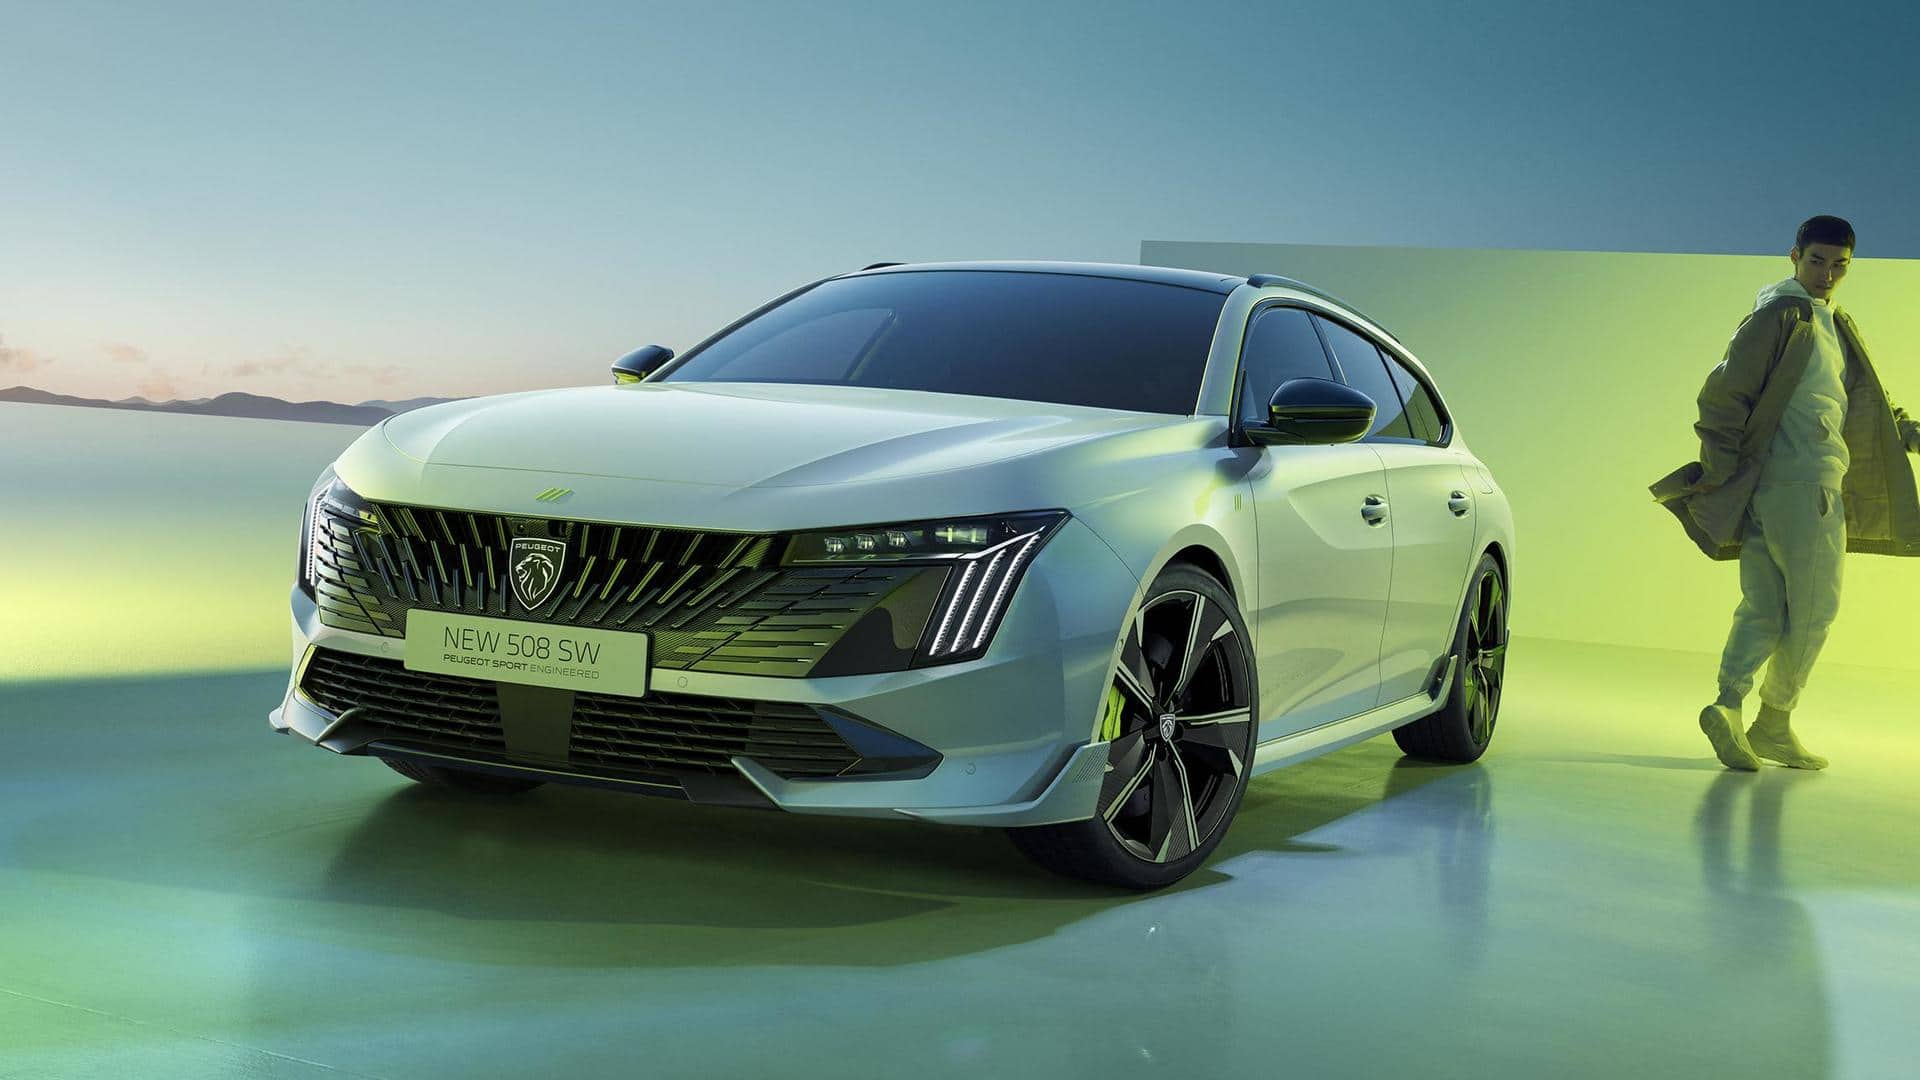 2023 Peugeot 508 breaks cover with stunning looks: Check features